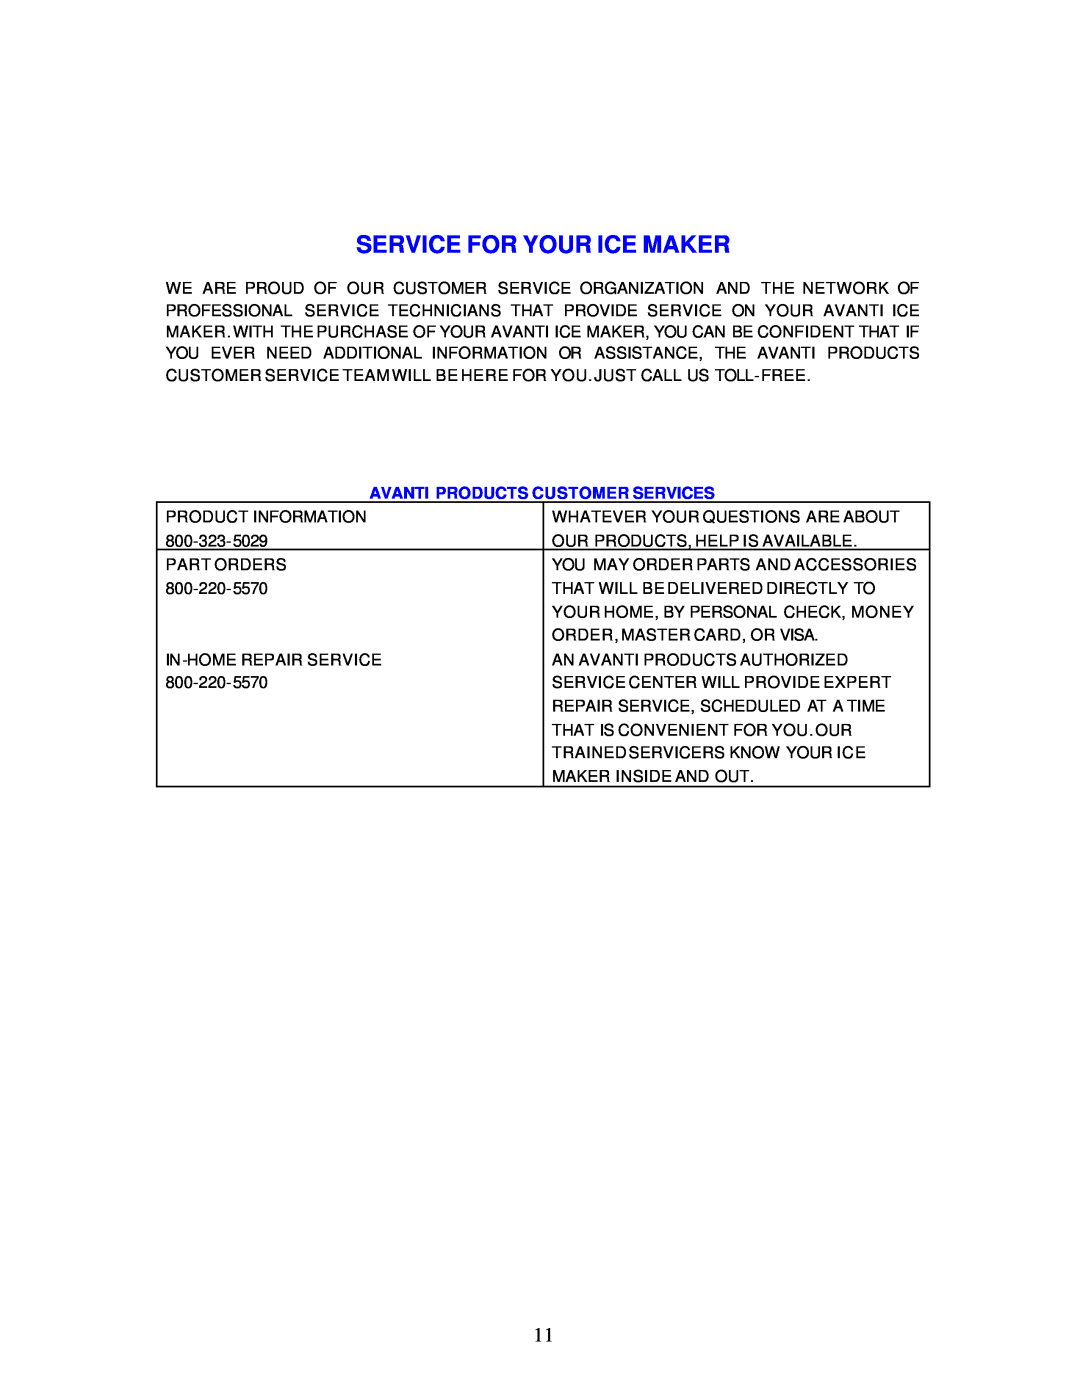 Avanti IM20SS instruction manual Service For Your Ice Maker, Avanti Products Customer Services 